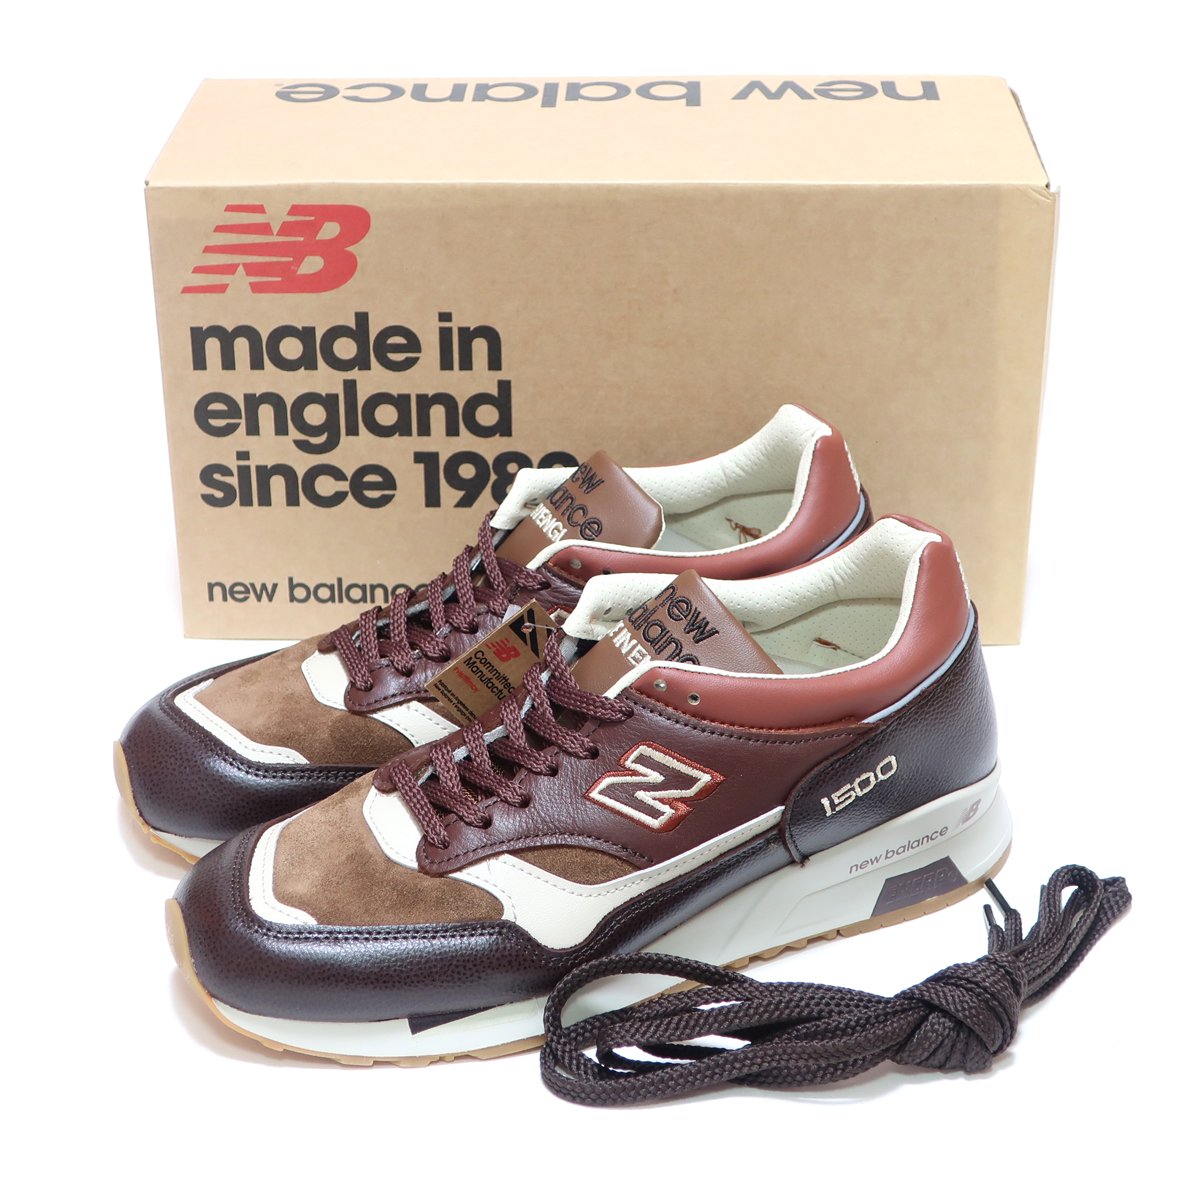 NEW BALANCE M1500GBI BROWN SUEDE/LEATHER MADE IN UK ENGLAND